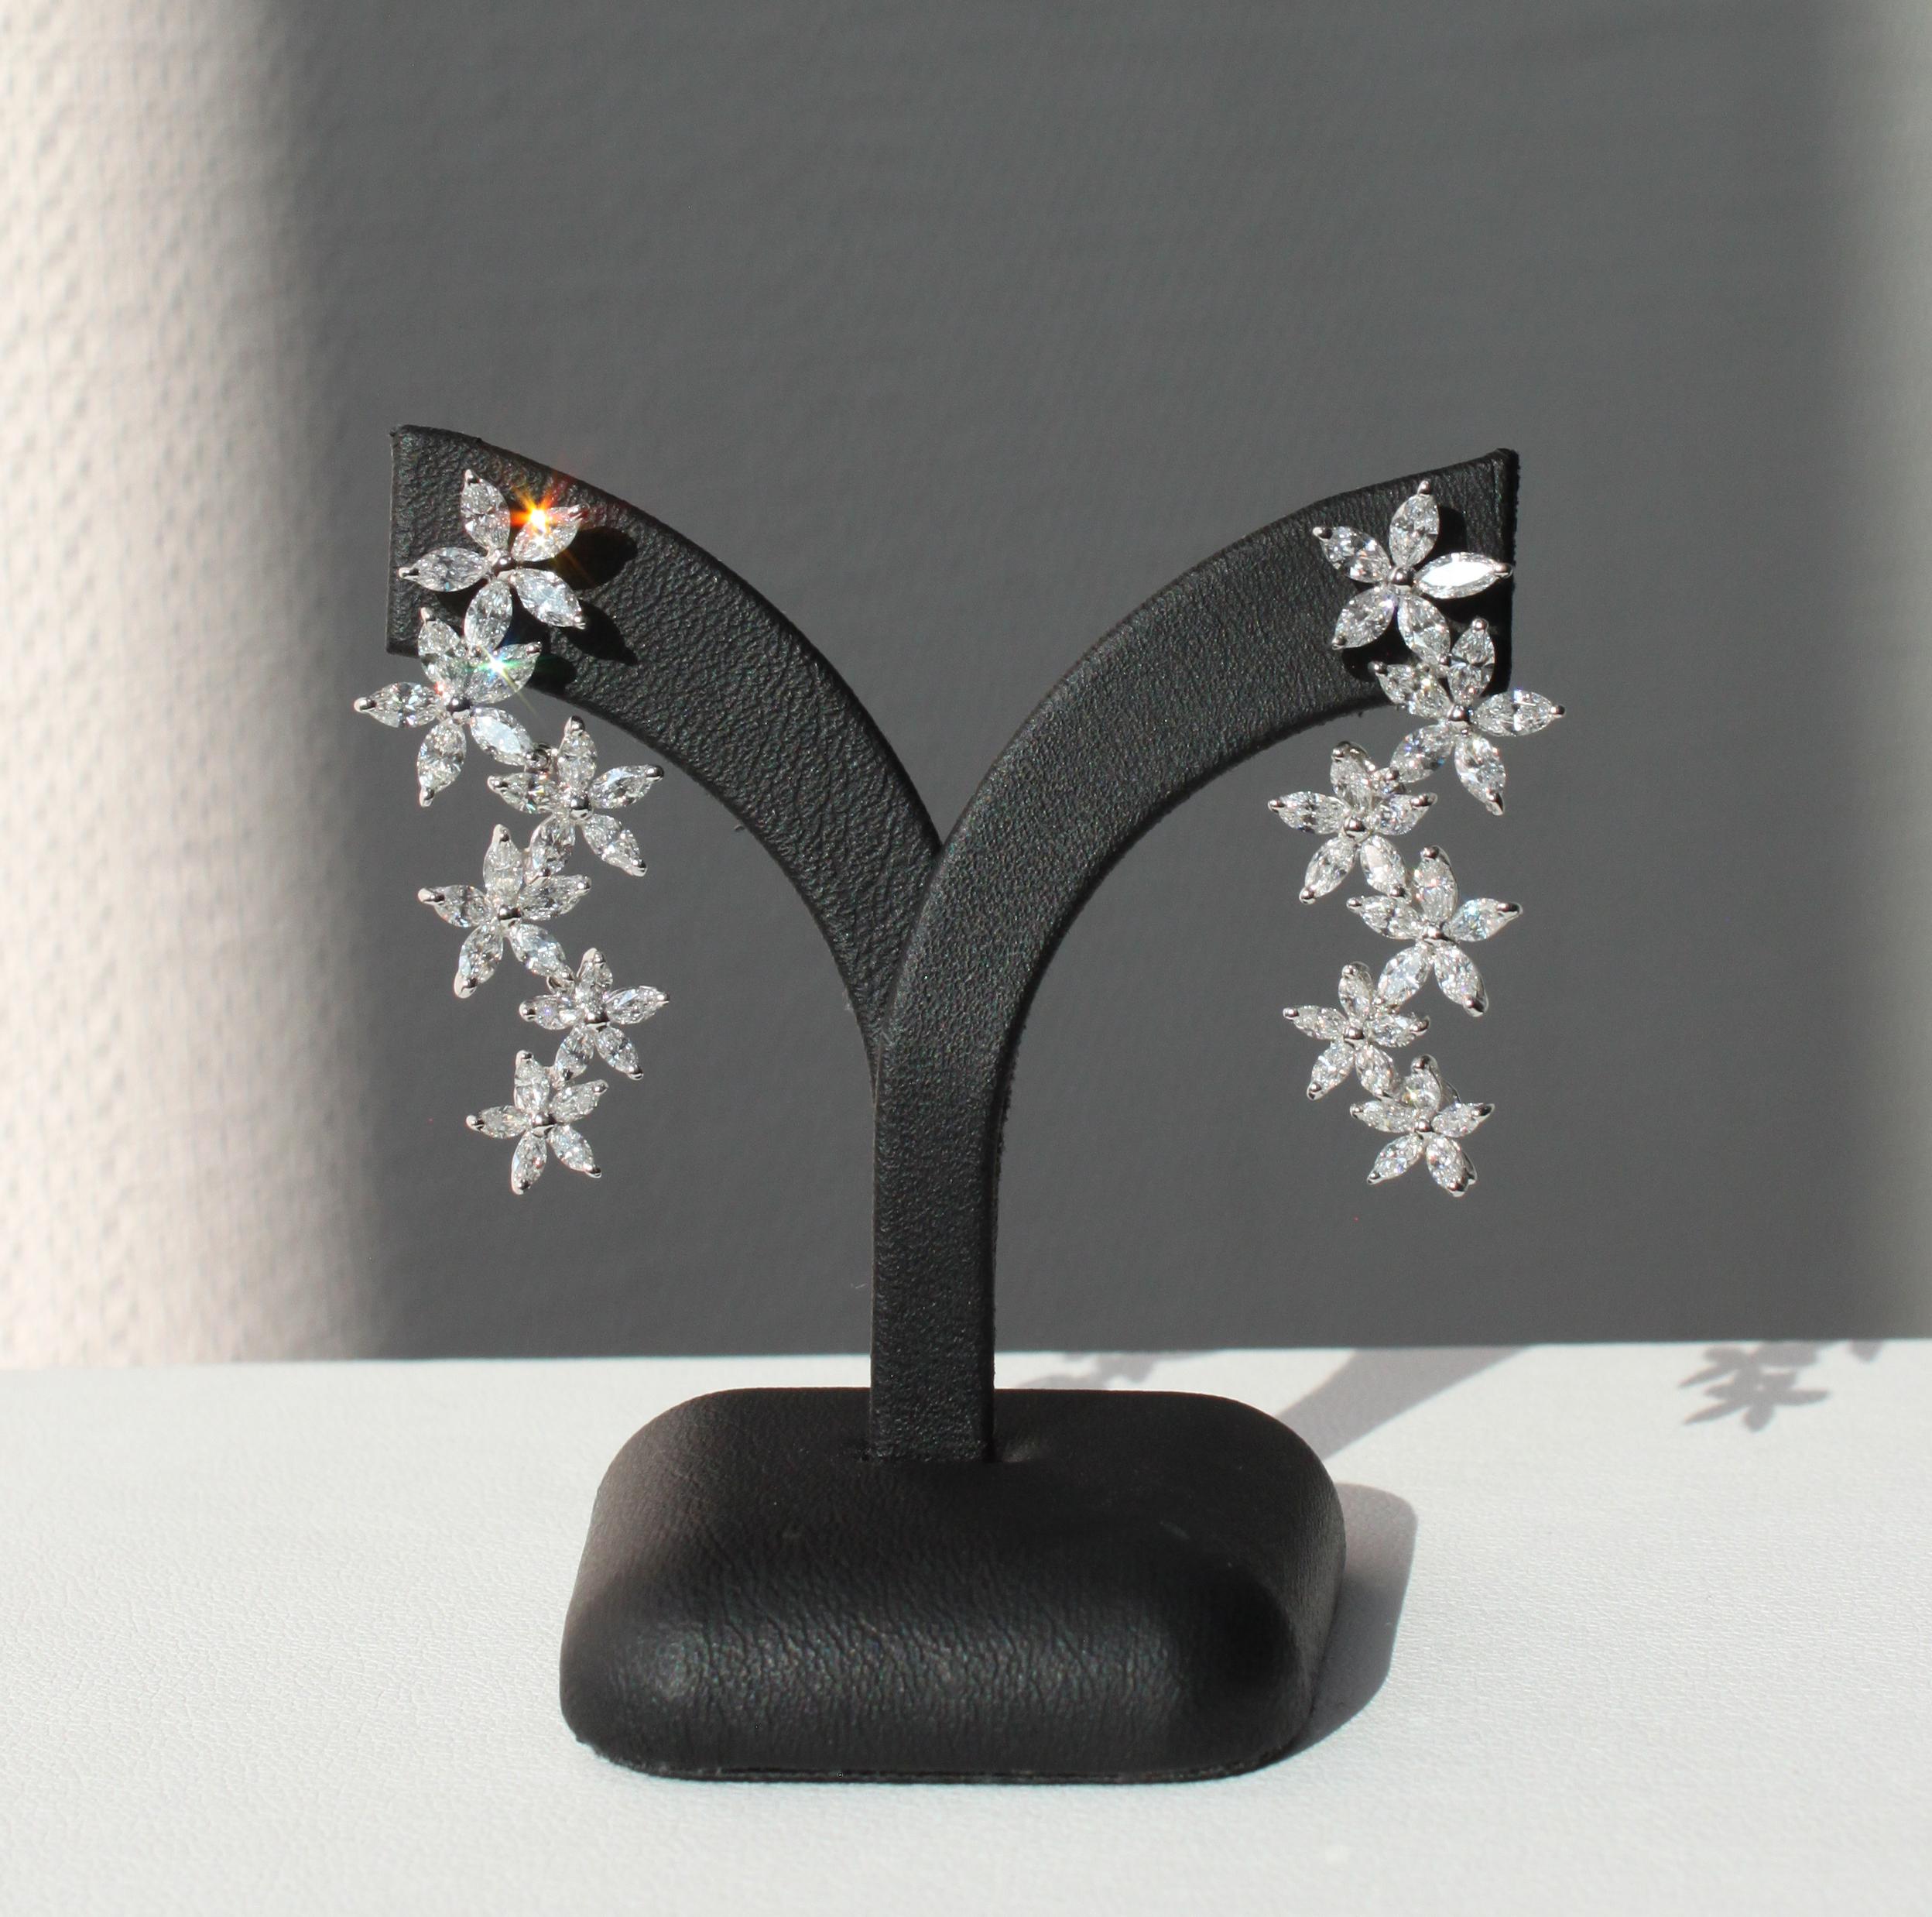 18K white gold
3.40ct natural marquise VS-SI diamonds
Total earring weight 6.42 g

Crafted with unparalleled artistry, these captivating earrings are a testament to exquisite craftsmanship. Fashioned in lustrous 18K white gold, their unique floral